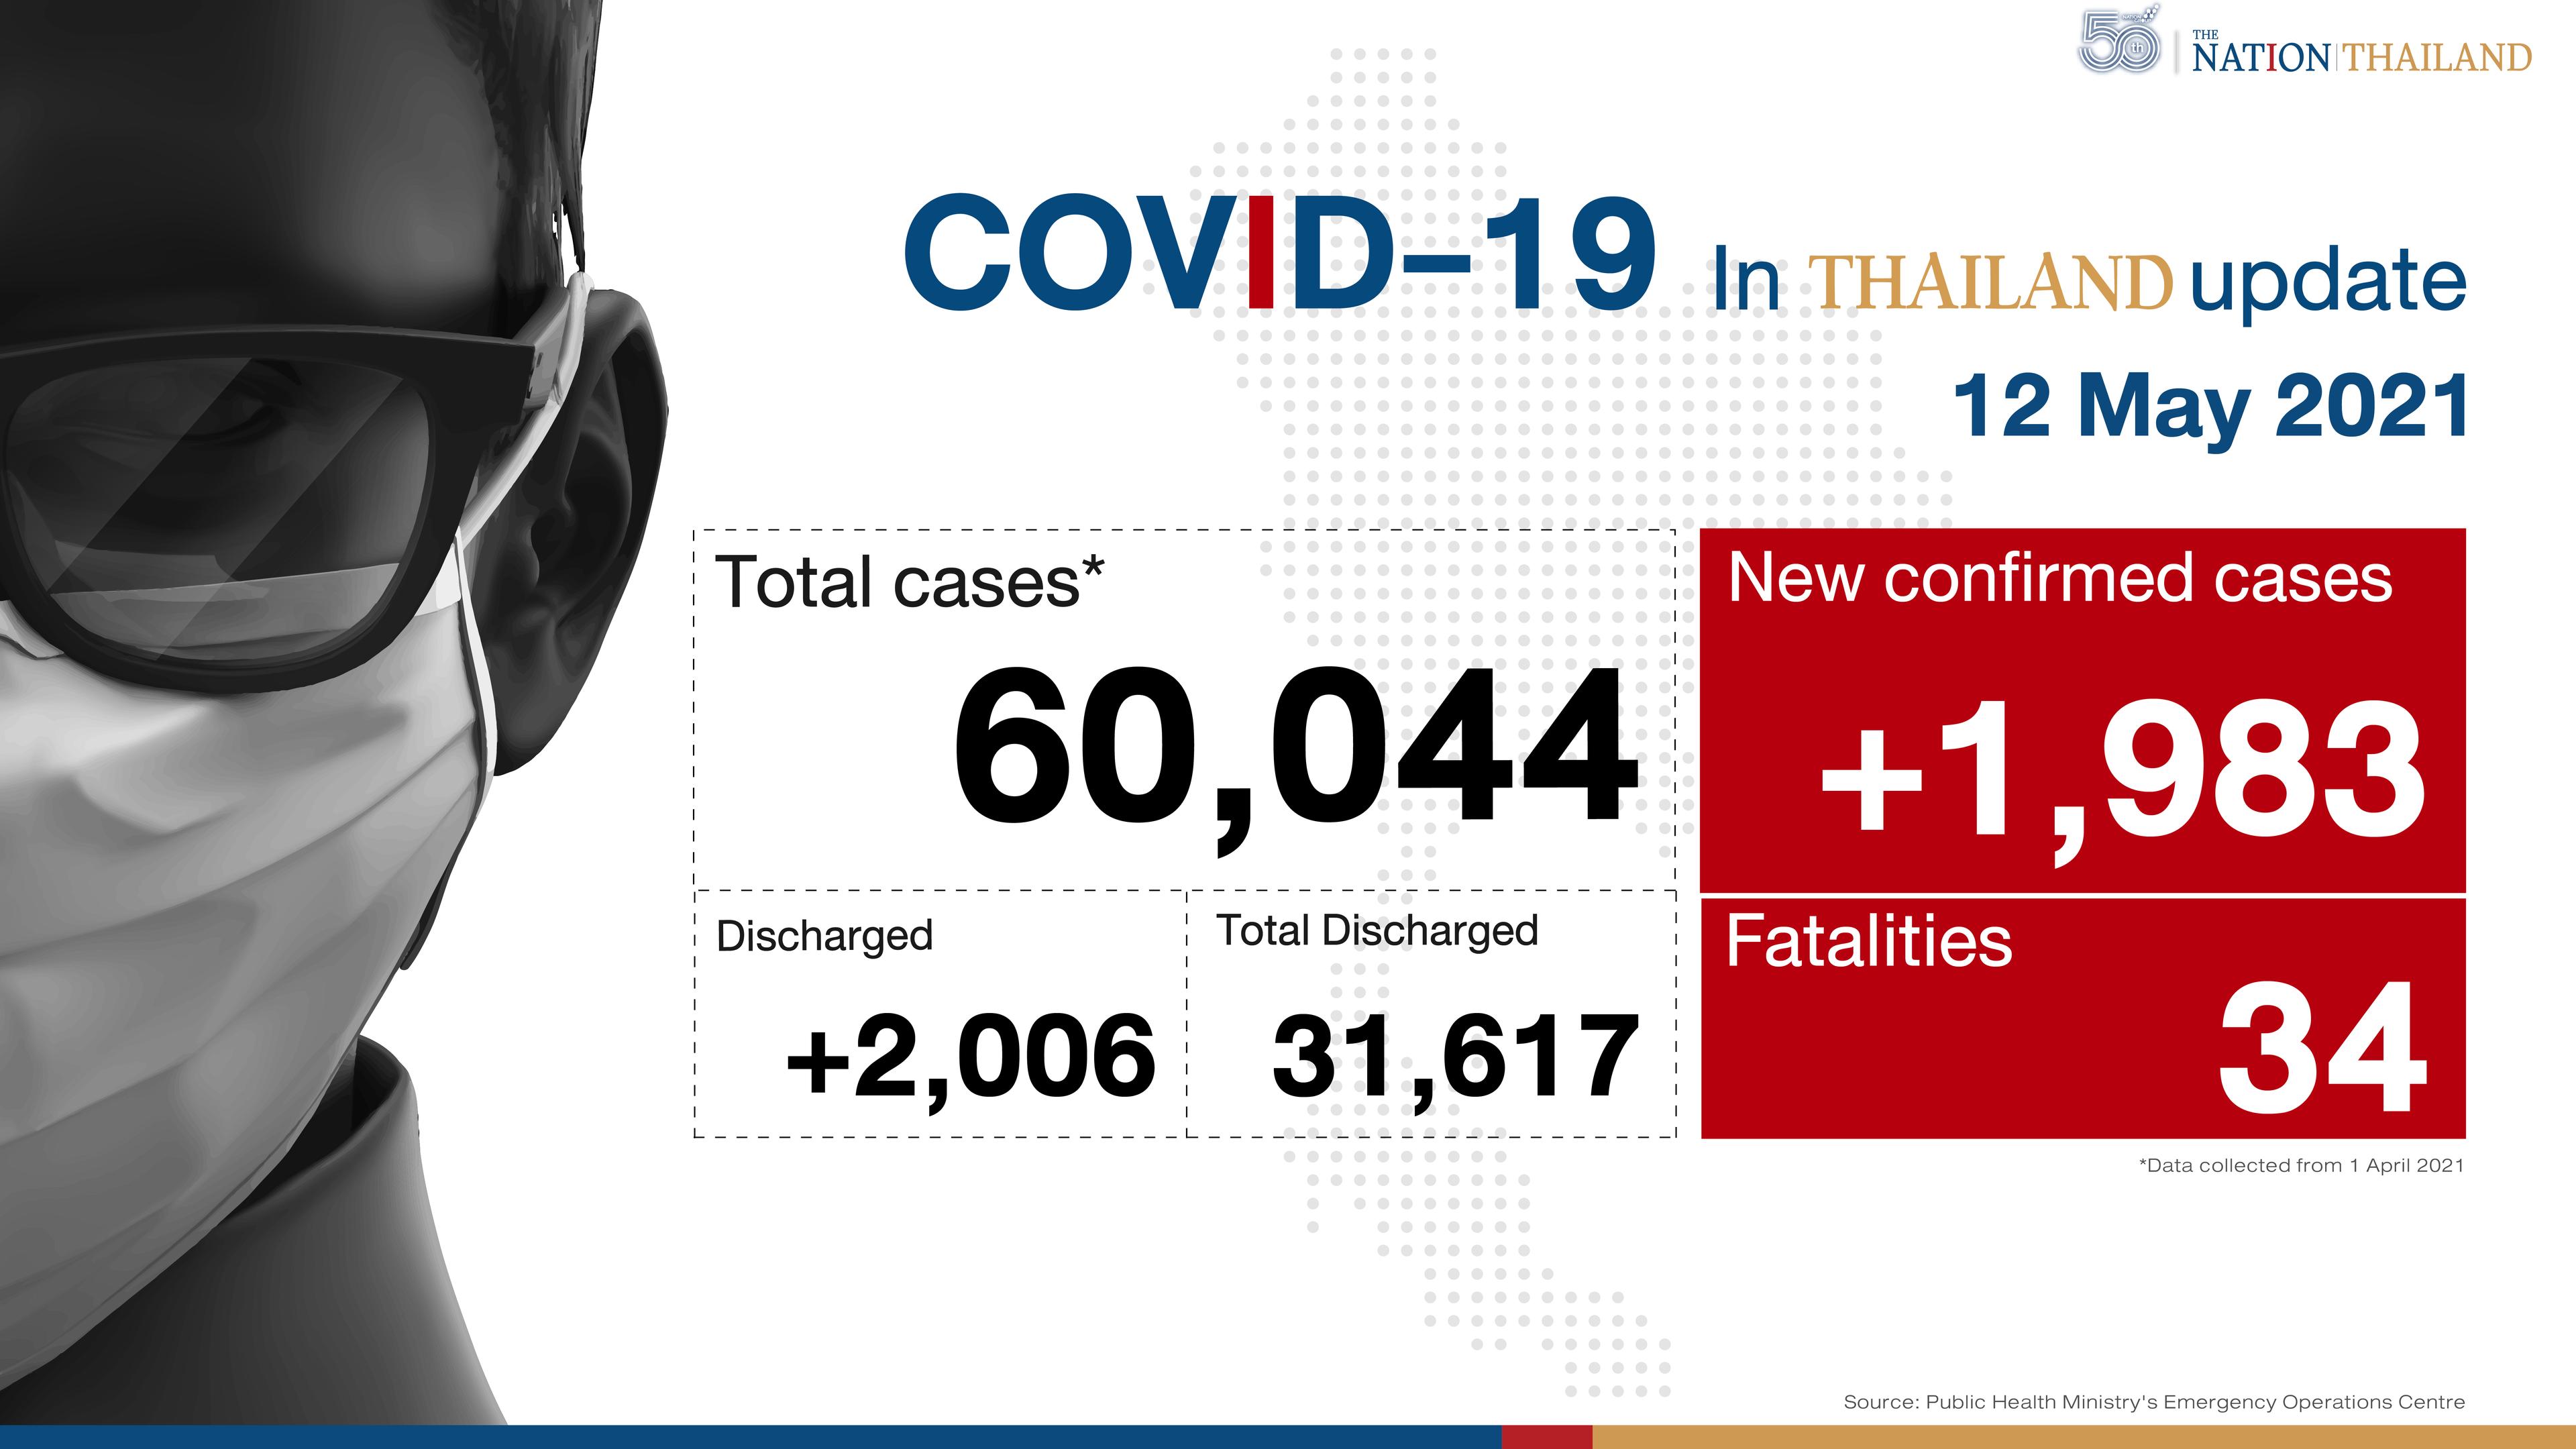 34 dead, 1,983 new cases as third wave continues hitting Thailand